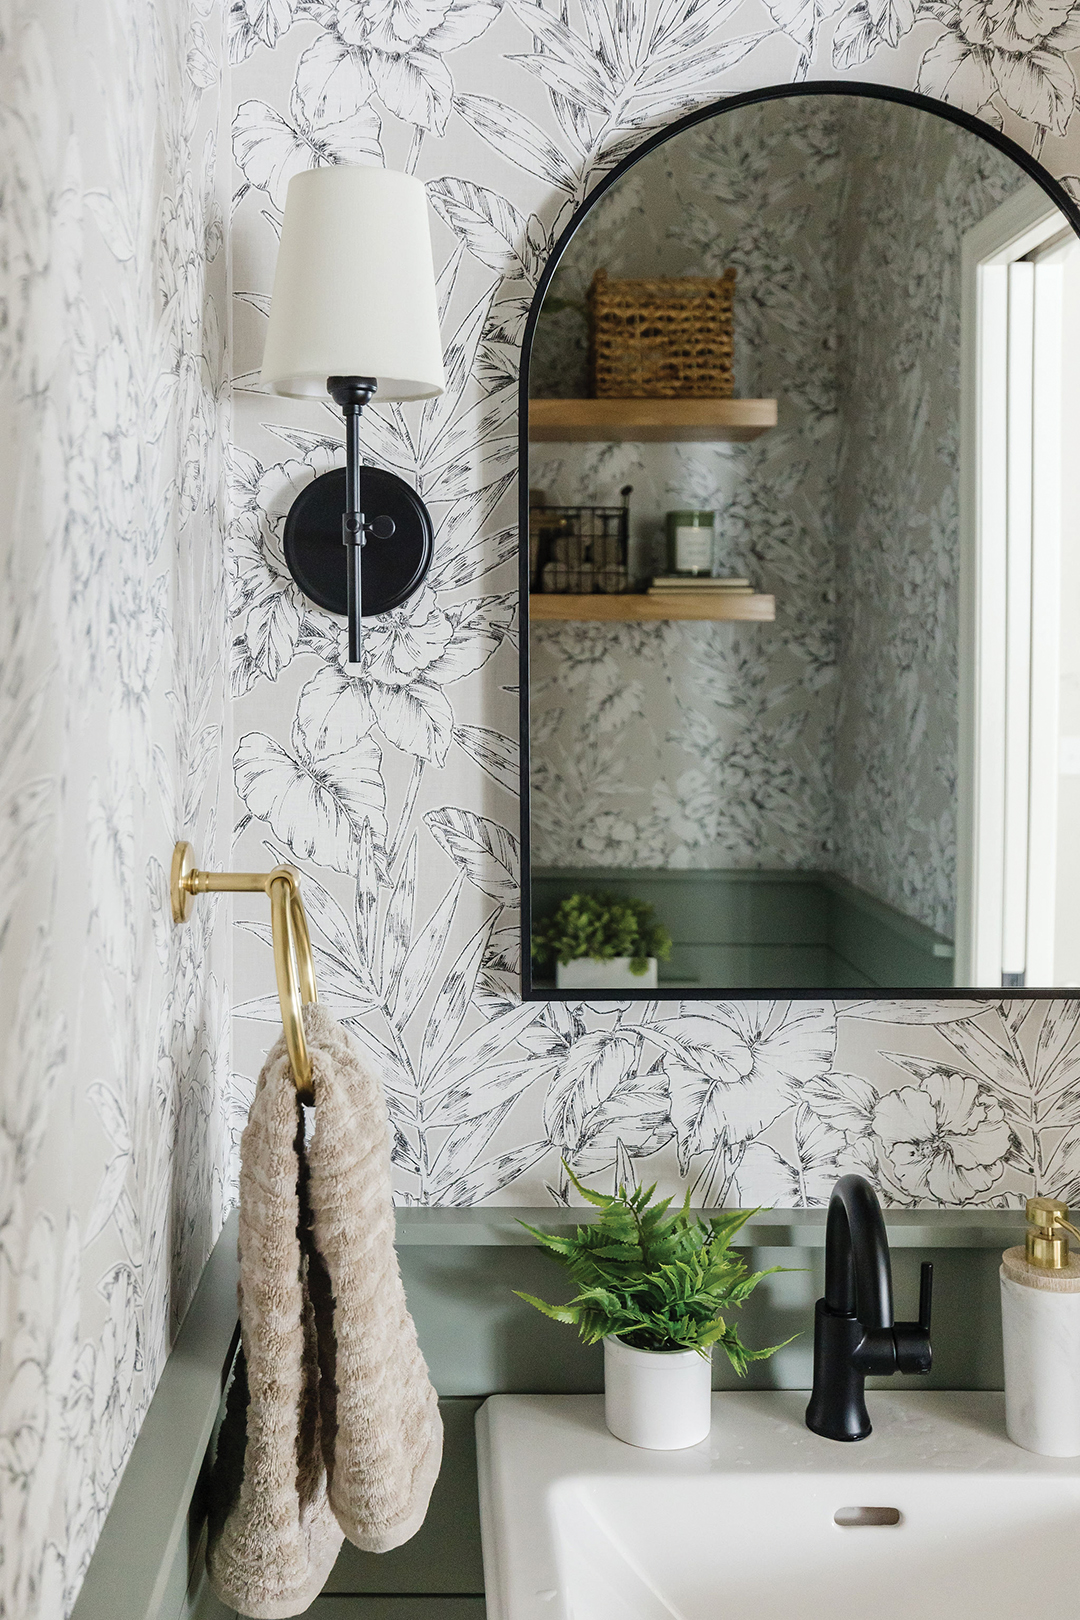 This bathroom reveals several important design trends that are on the rise, including floral wallpaper and nature-inspired tones.